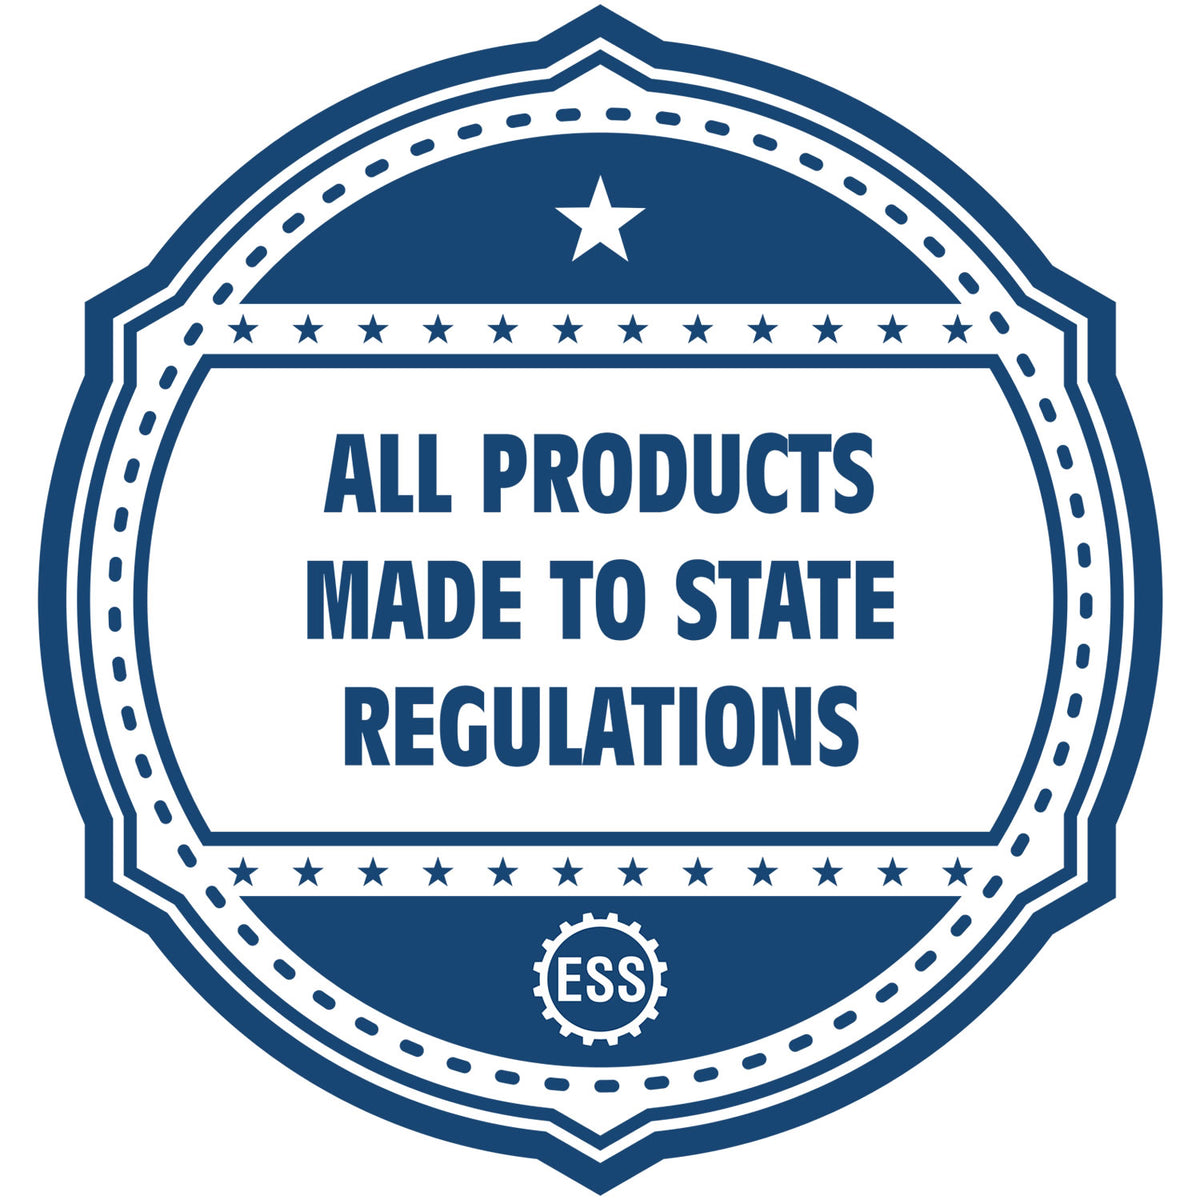 An icon or badge element for the Premium MaxLight Pre-Inked Nevada Landscape Architectural Stamp showing that this product is made in compliance with state regulations.